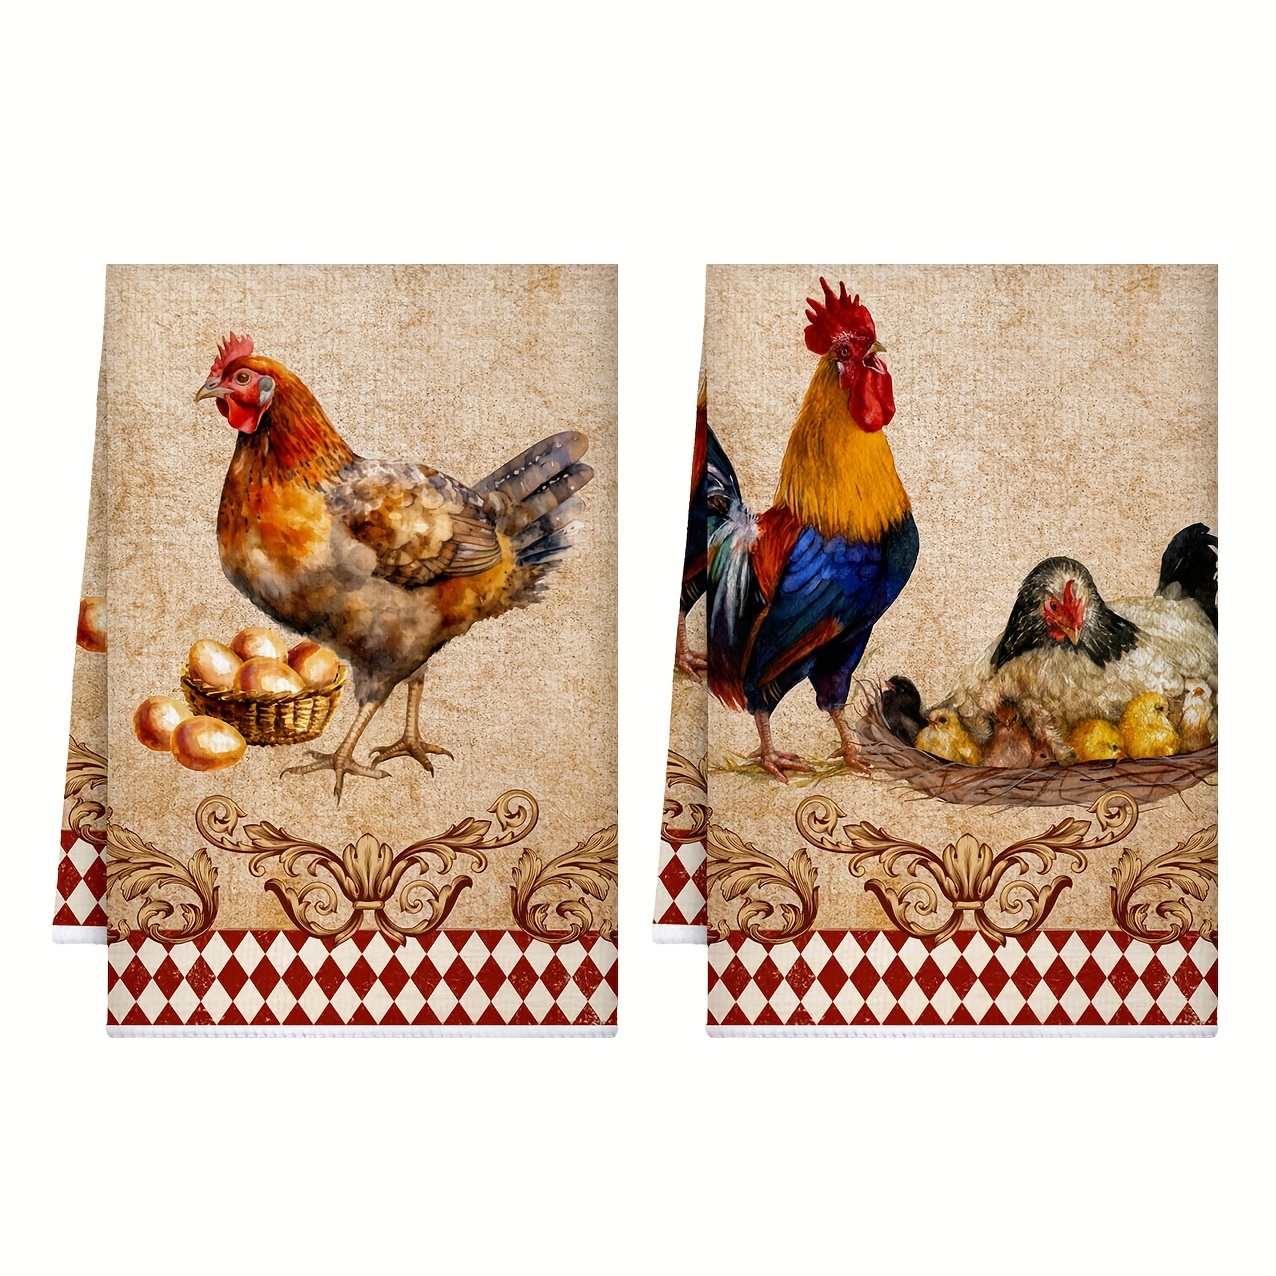 

2pcs, Hand Towels, Farmhouse Rustic Style Dish Towels, Rooster Eggs Printed Kitchen Towels, Farmhouse Vintage Decorative Scouring Pad, Kitchen Decorations, Cleaning Stuff